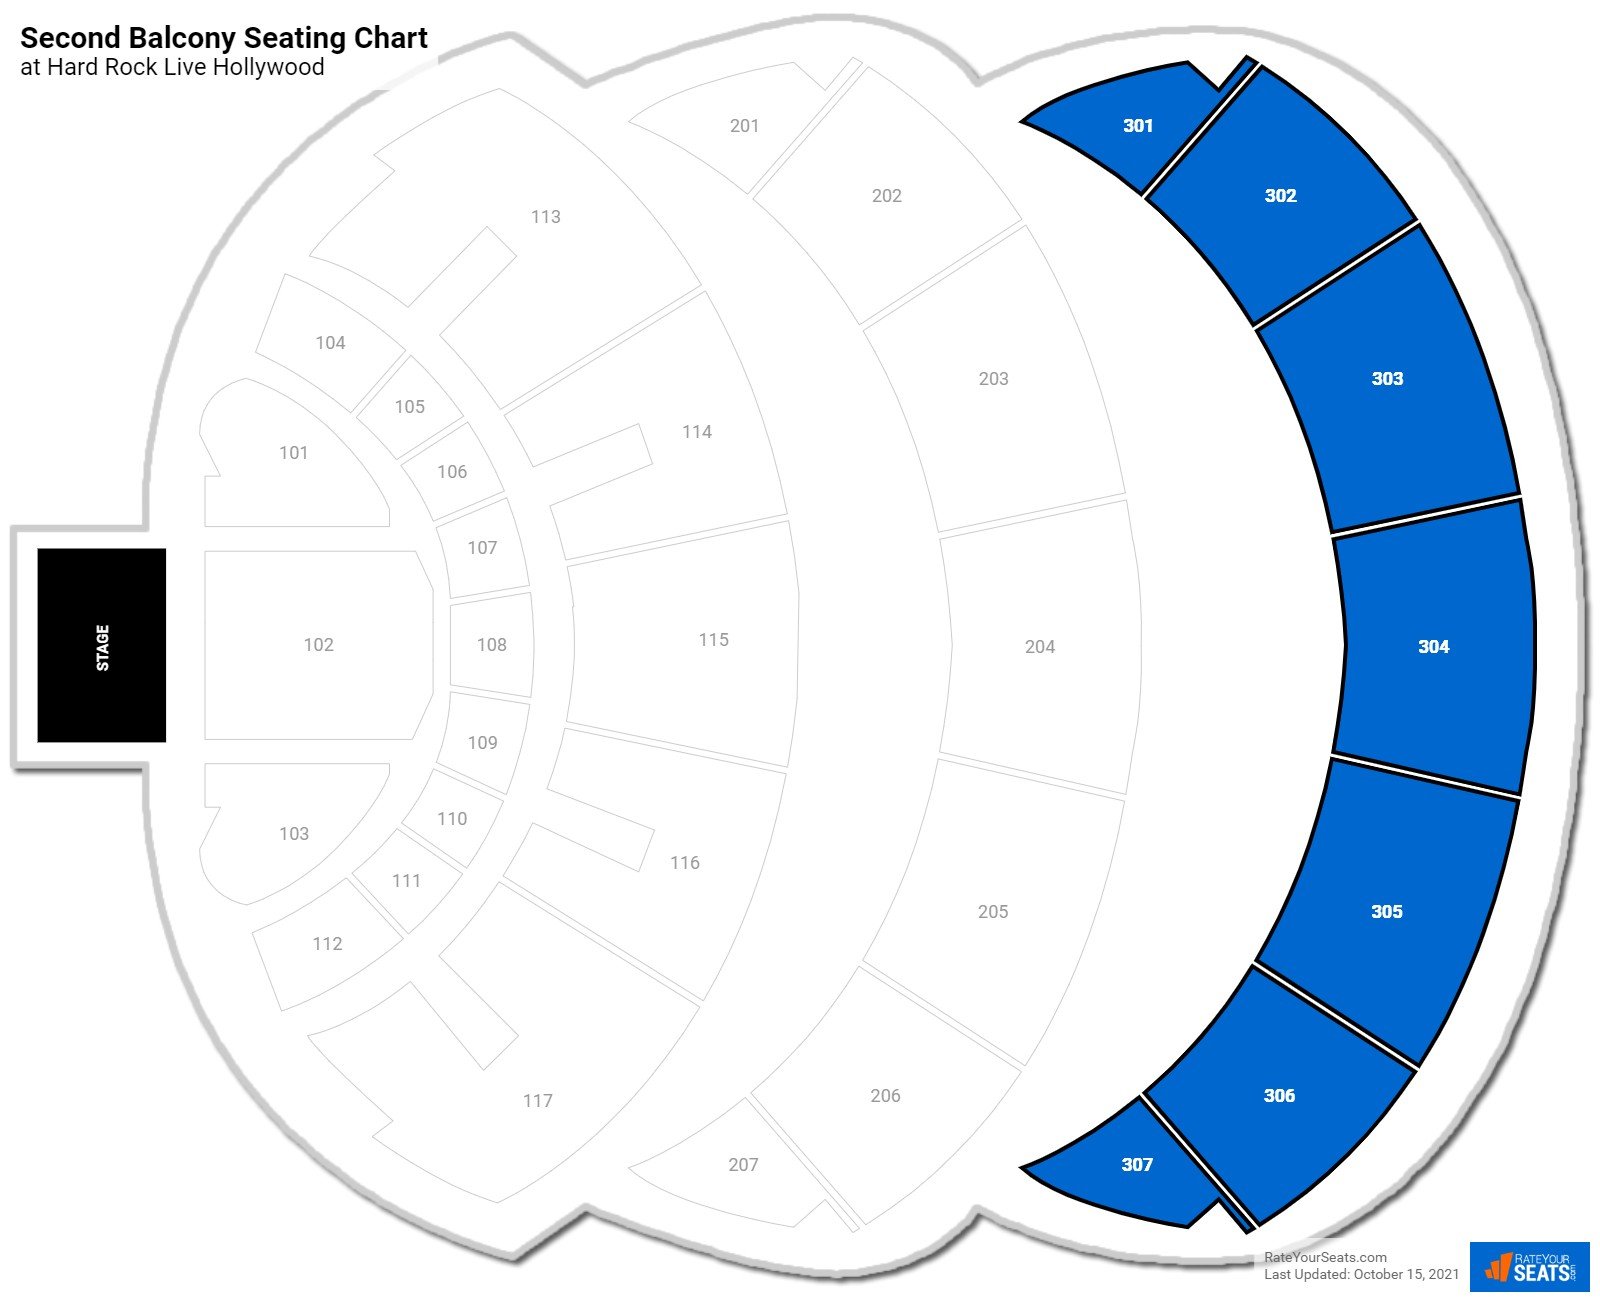 Concert Second Balcony Seating Chart at Hard Rock Live Hollywood